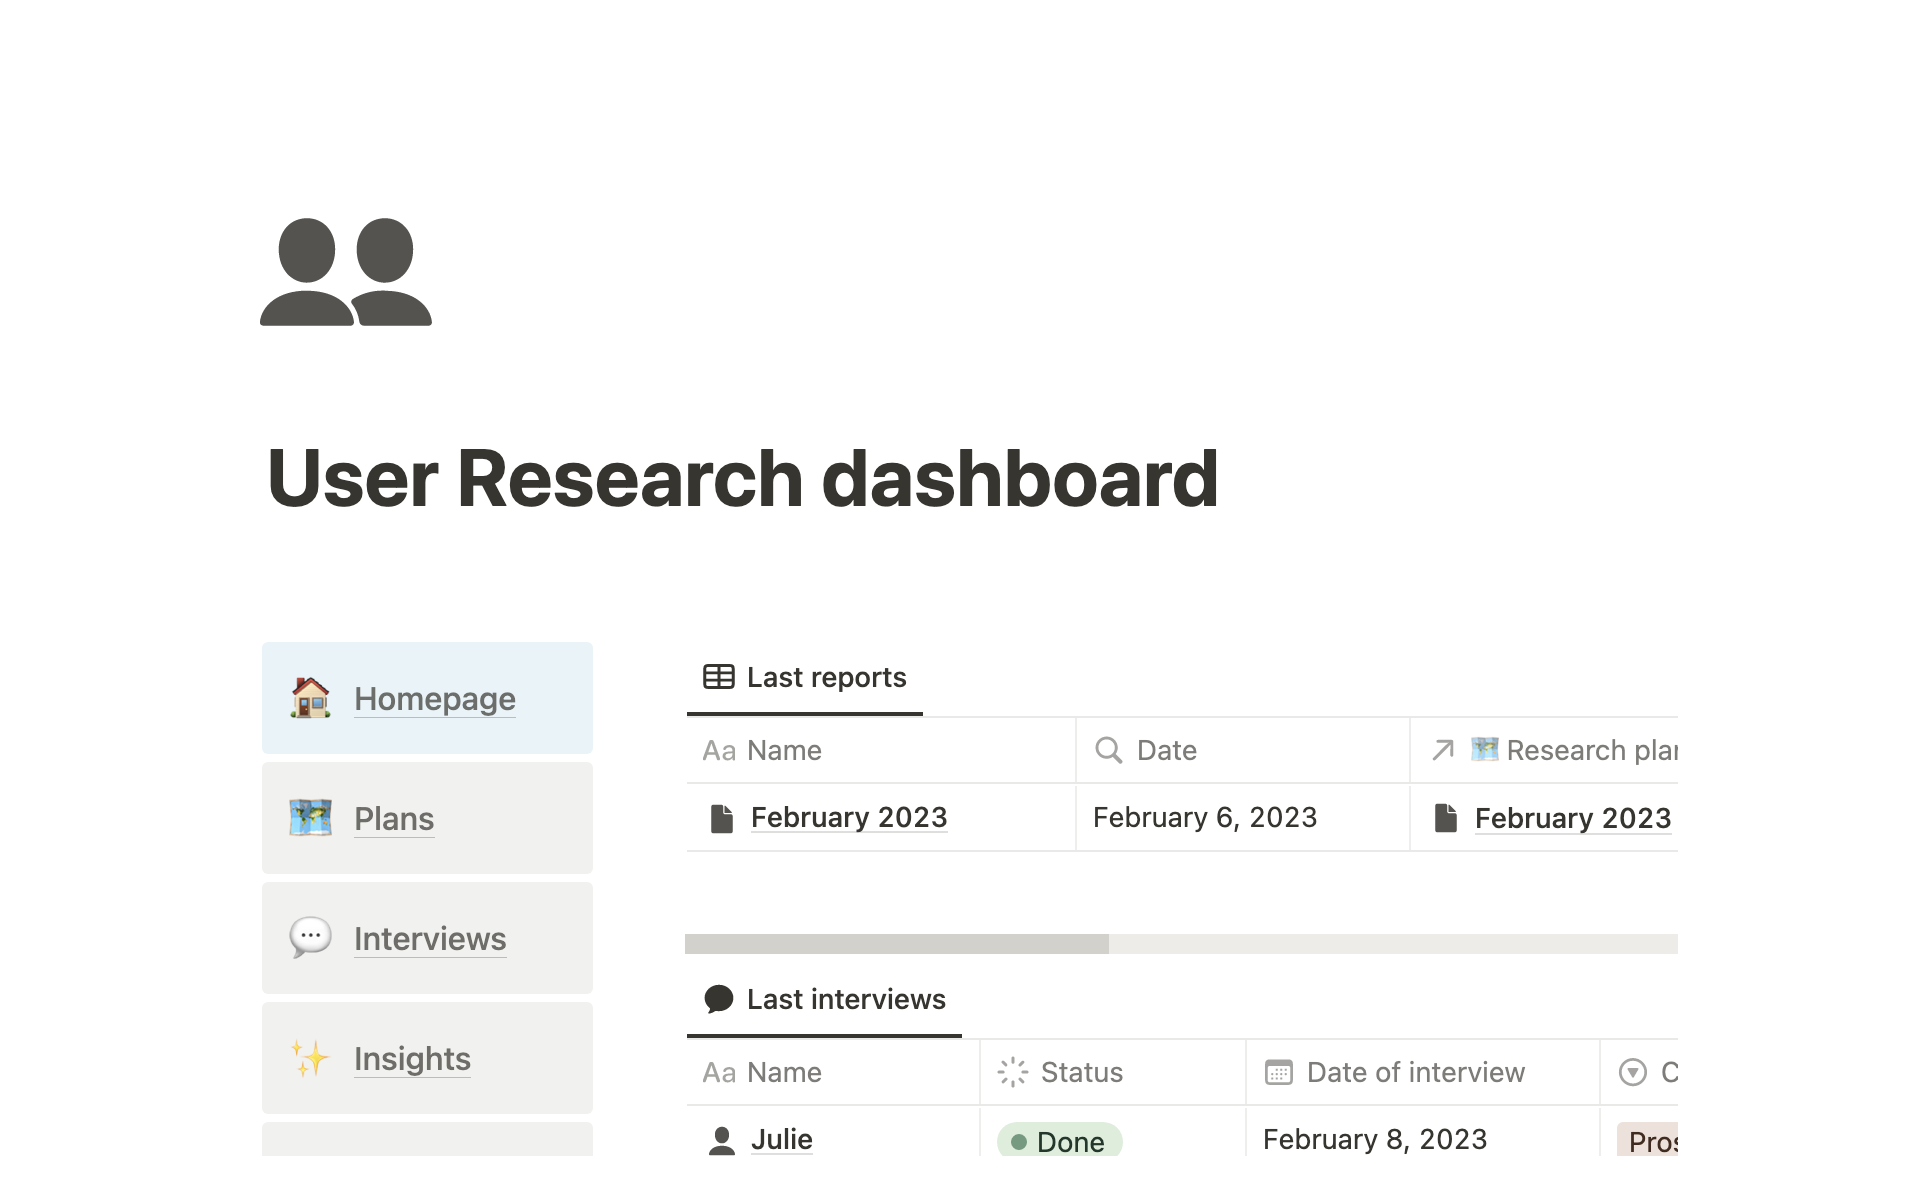 Organize, analyze and achive your user research! Find all your interviews and insights in one place.